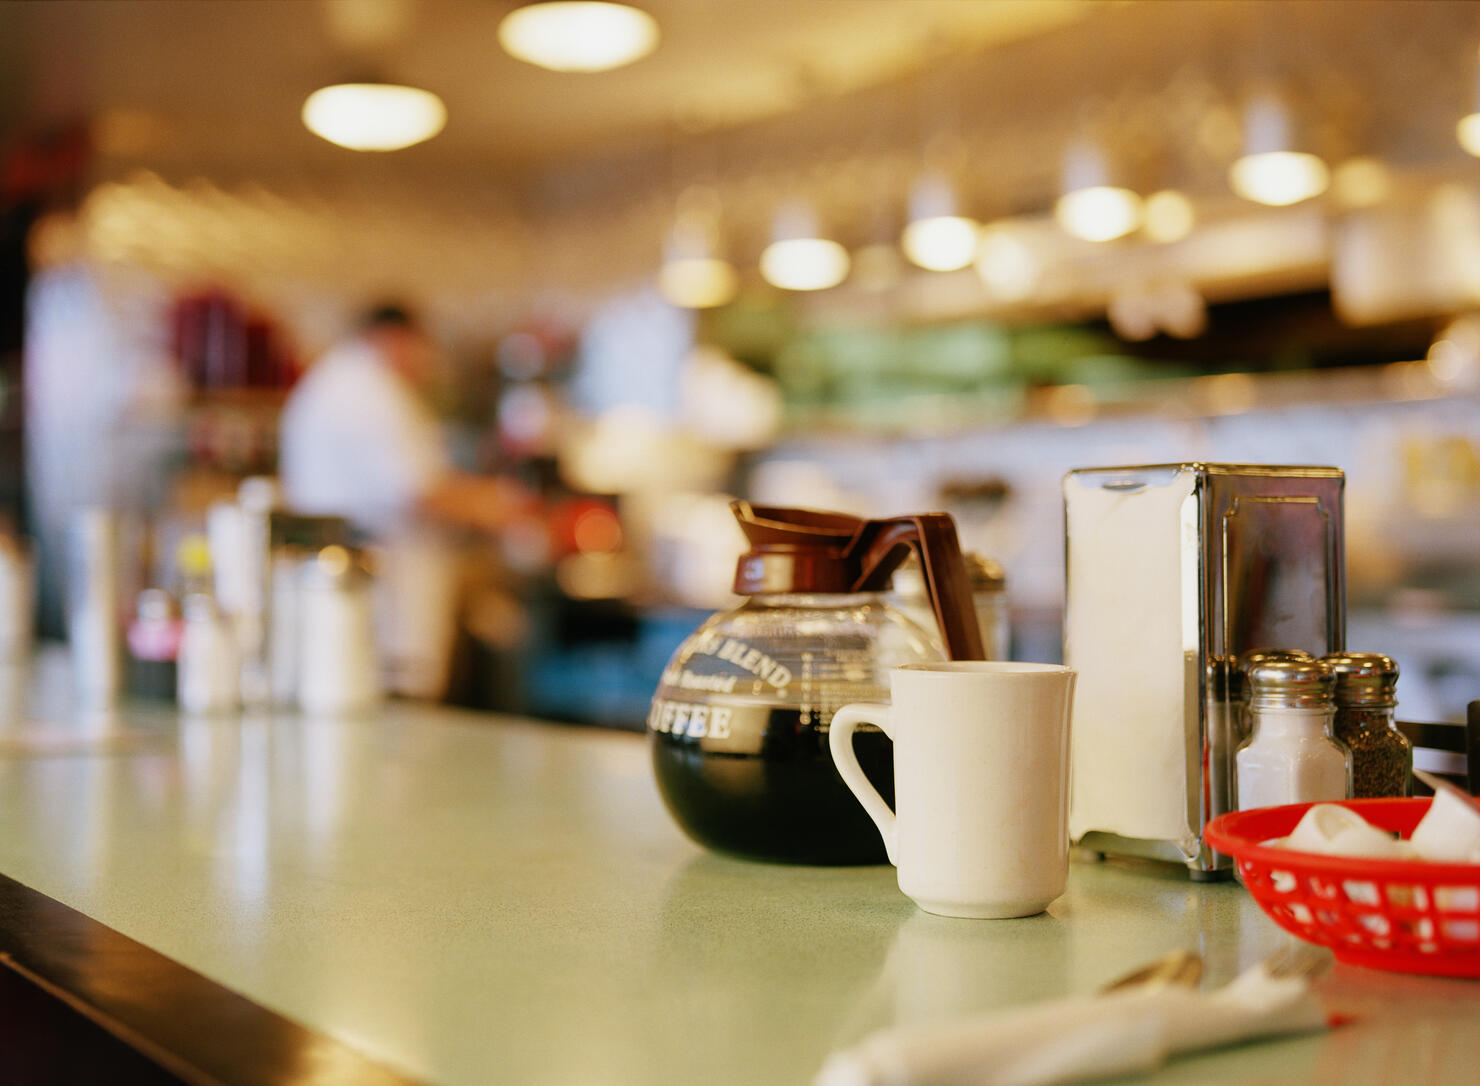 Diner counter top with coffee pot and cup next to napkin dispenser